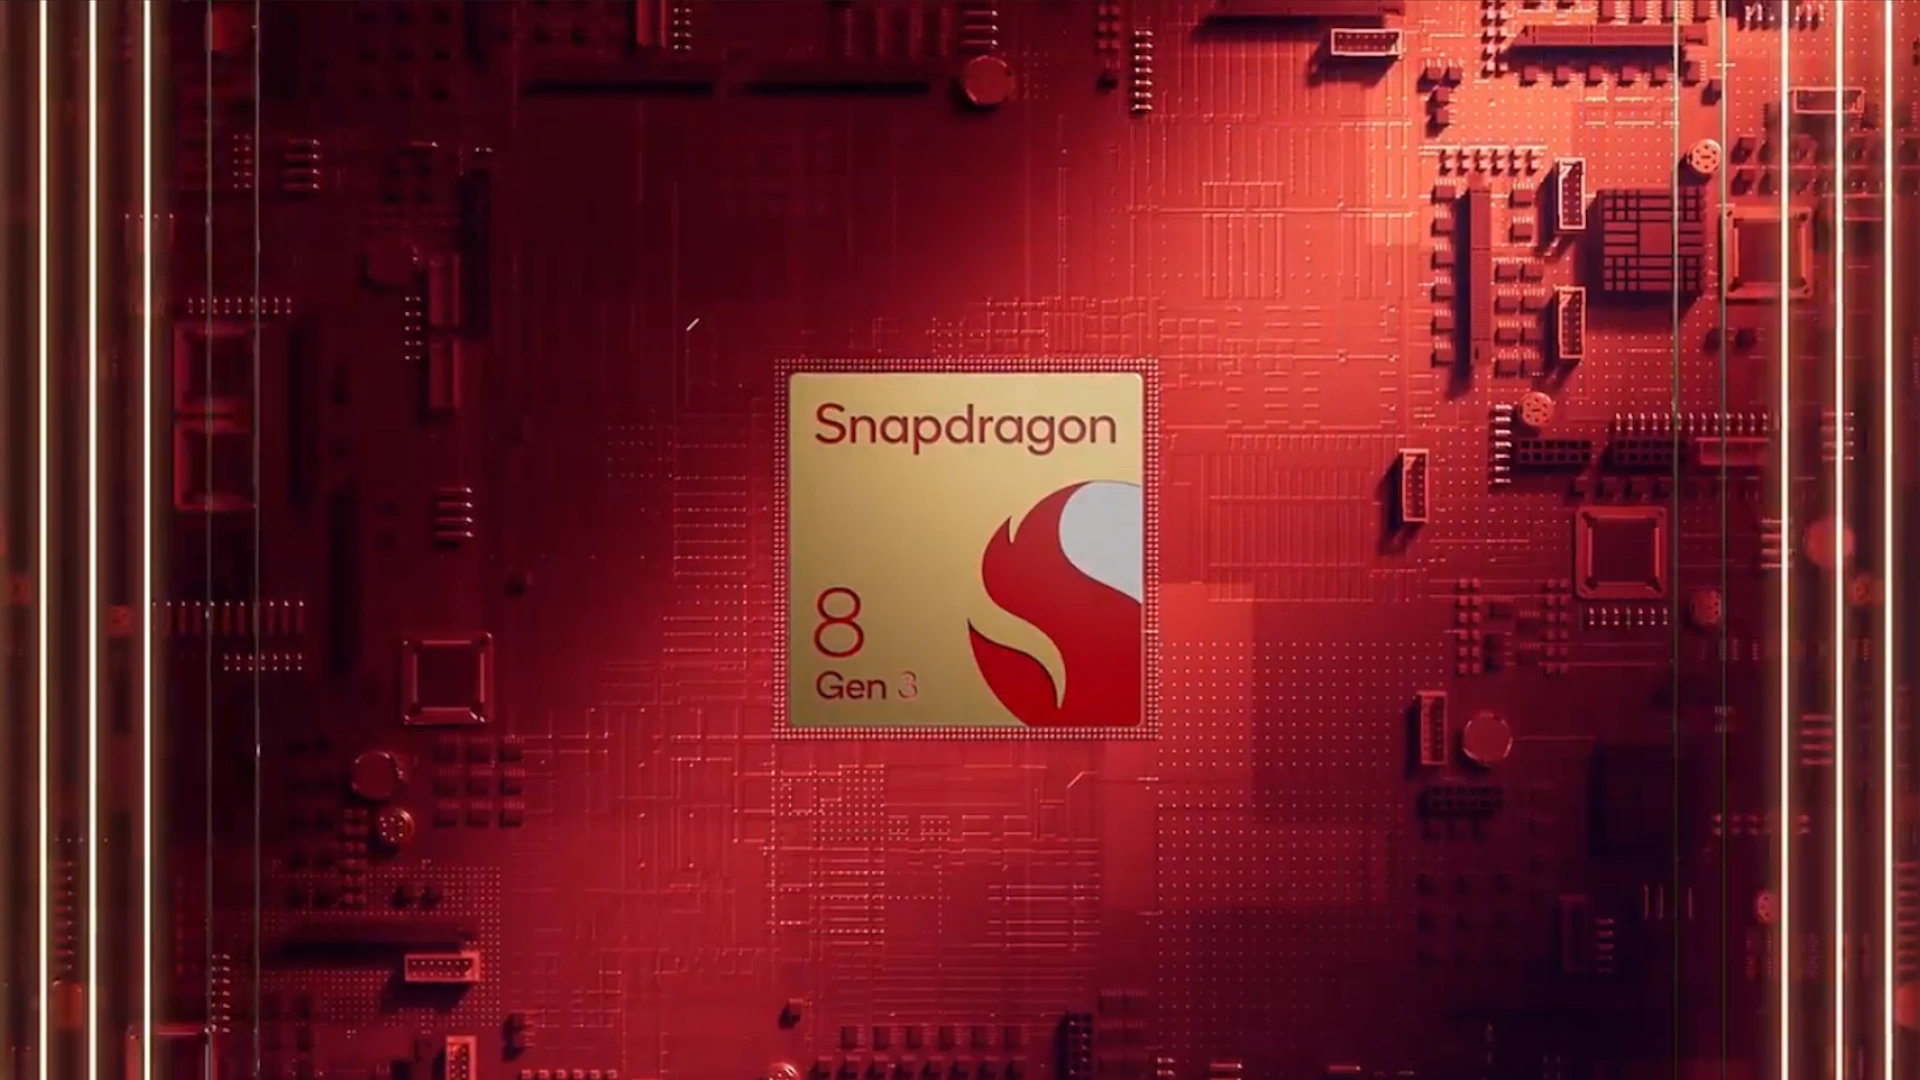 Meet the Snapdragon 8 Gen 3 – the newly released Qualcomm chipset with a focus on AI